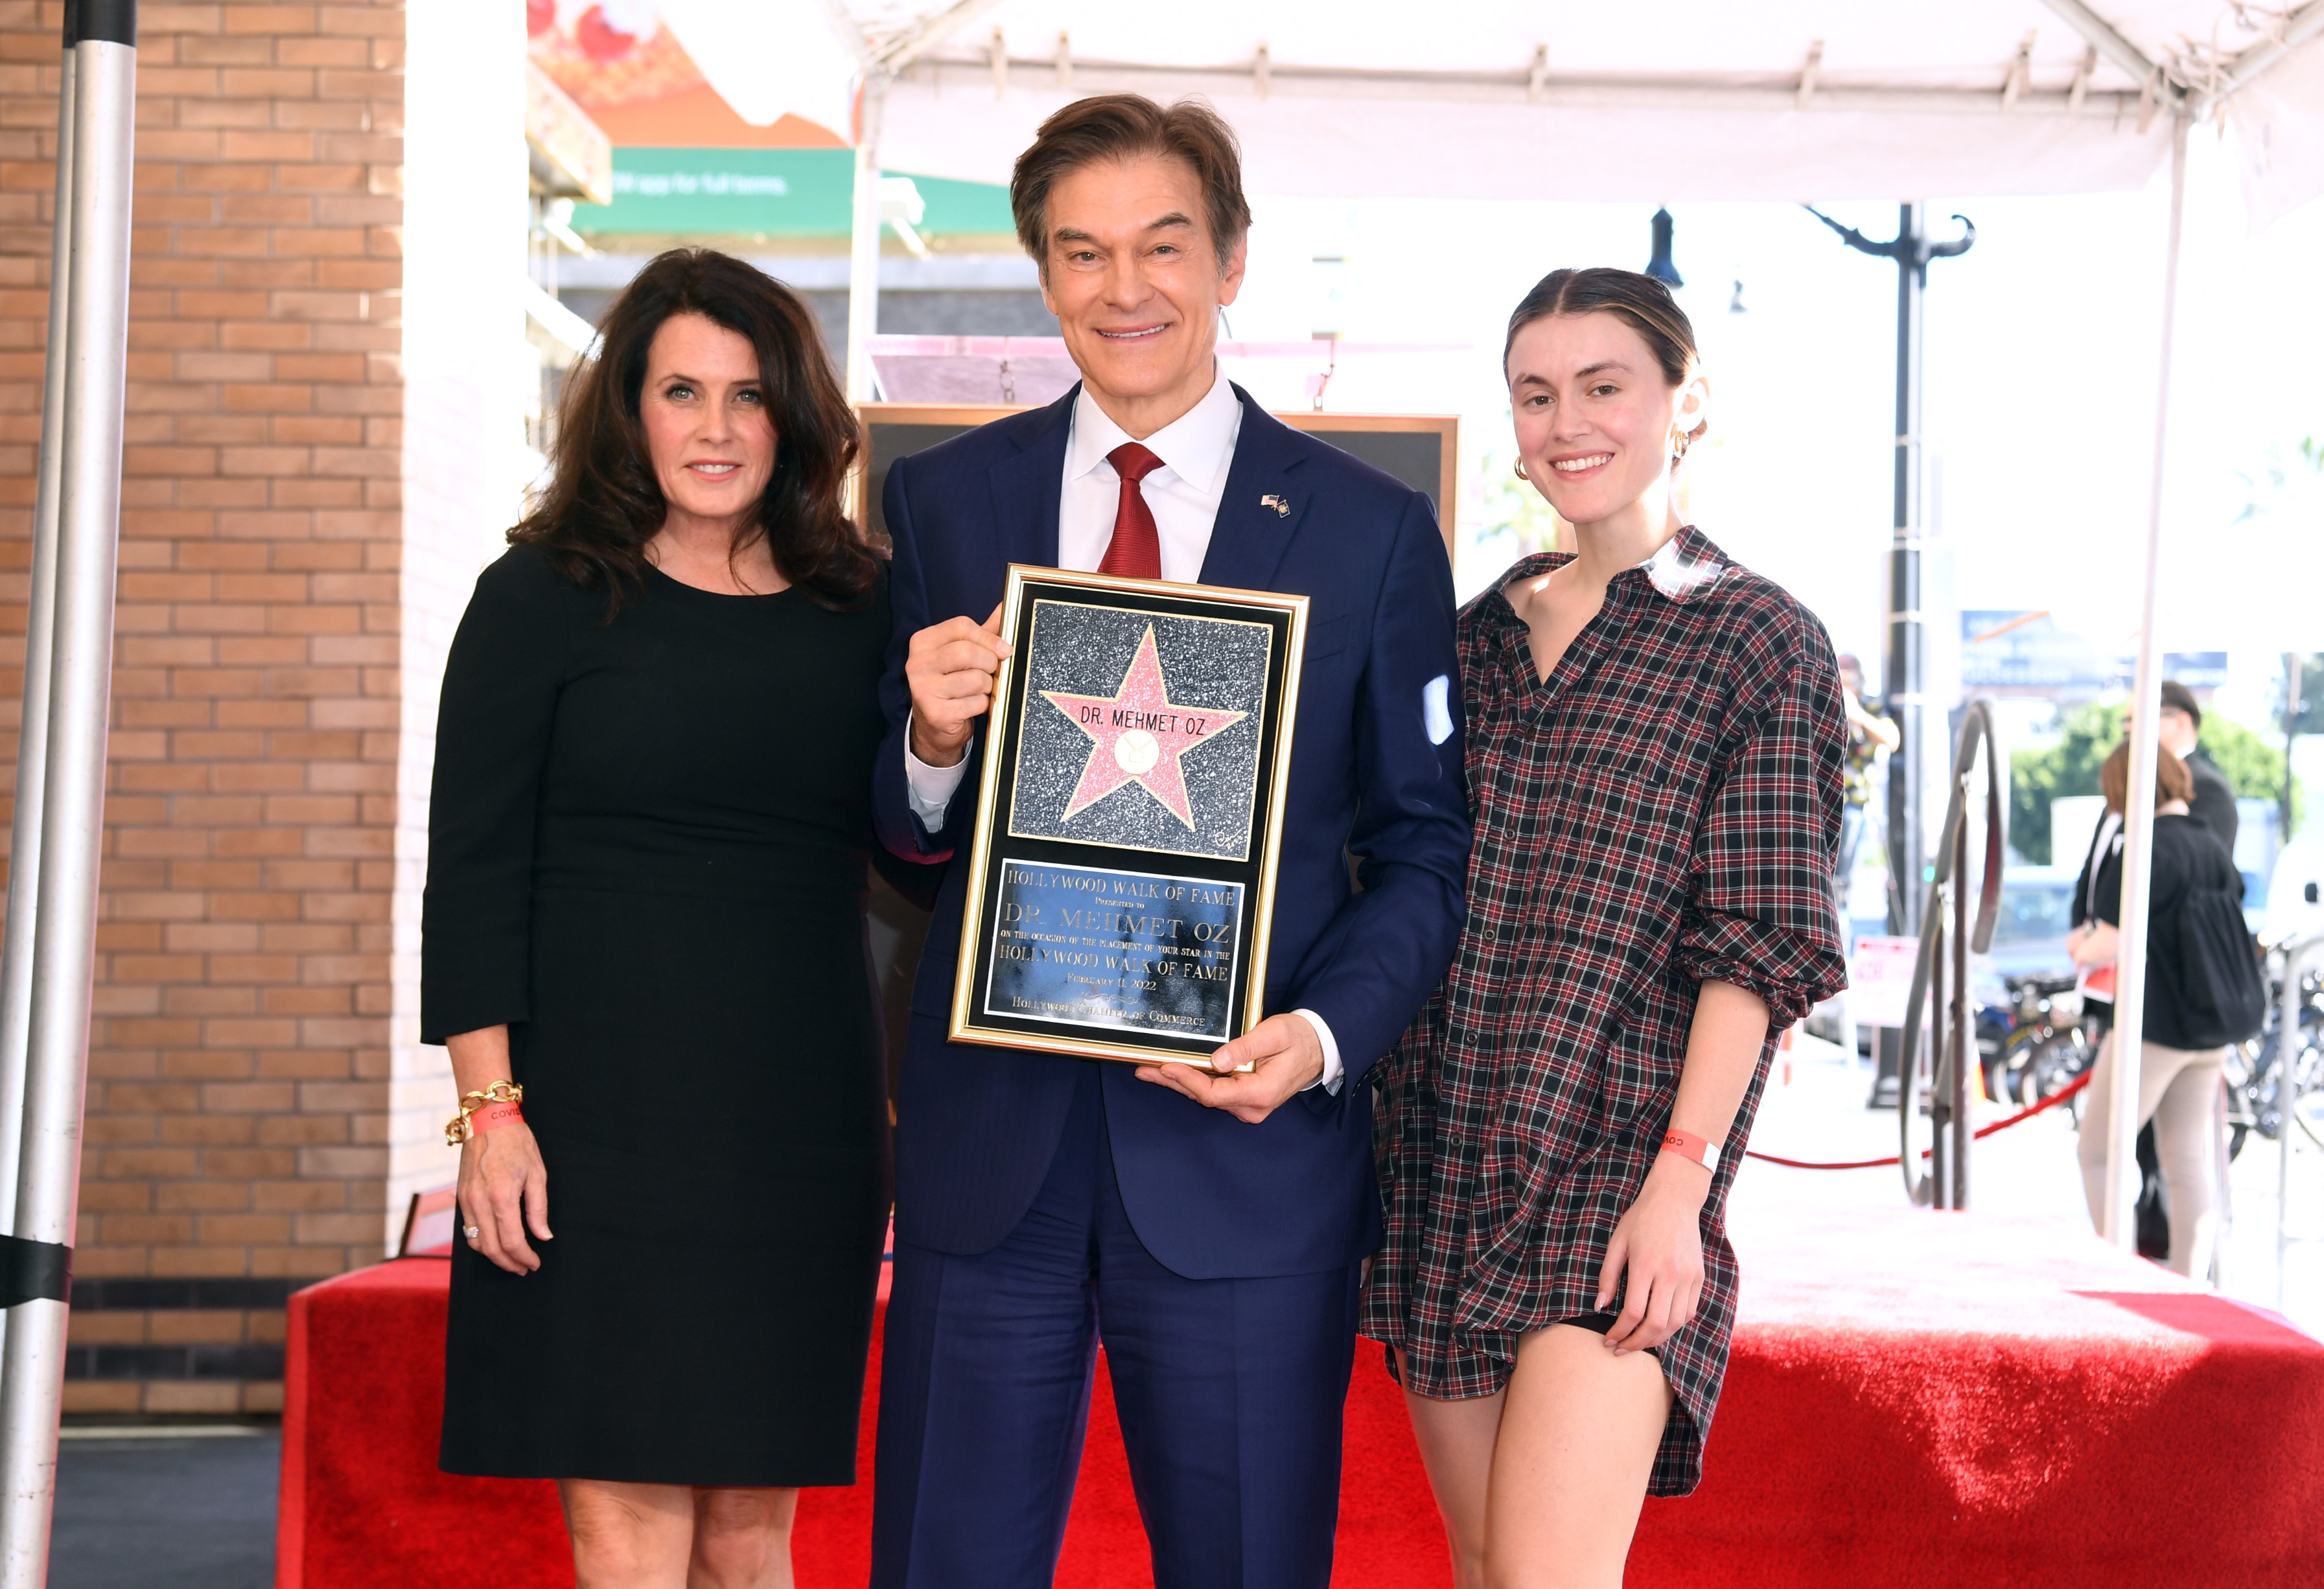 <p>Dr. Mehmet Oz was flanked by wife Lisa Oz and their youngest daughter, Zoe Oz -- who was born in the mid-'90s -- at his <a href="https://www.wonderwall.com/celebrity/photos/hollywood-walk-fame-star-ceremony-best-celeb-photos-3015941.gallery">Hollywood Walk of Fame star ceremony</a> on Feb. 11, 2022. Zoe, a Harvard University graduate like her dad, worked in fashion design and brand development at companies like Theory and Helmut Lang as well as in medical research labs before co-founding and serving as chief marketing officer at Kairos, a portfolio of brands across healthcare and financial services that works to make life more affordable for younger generations.</p>